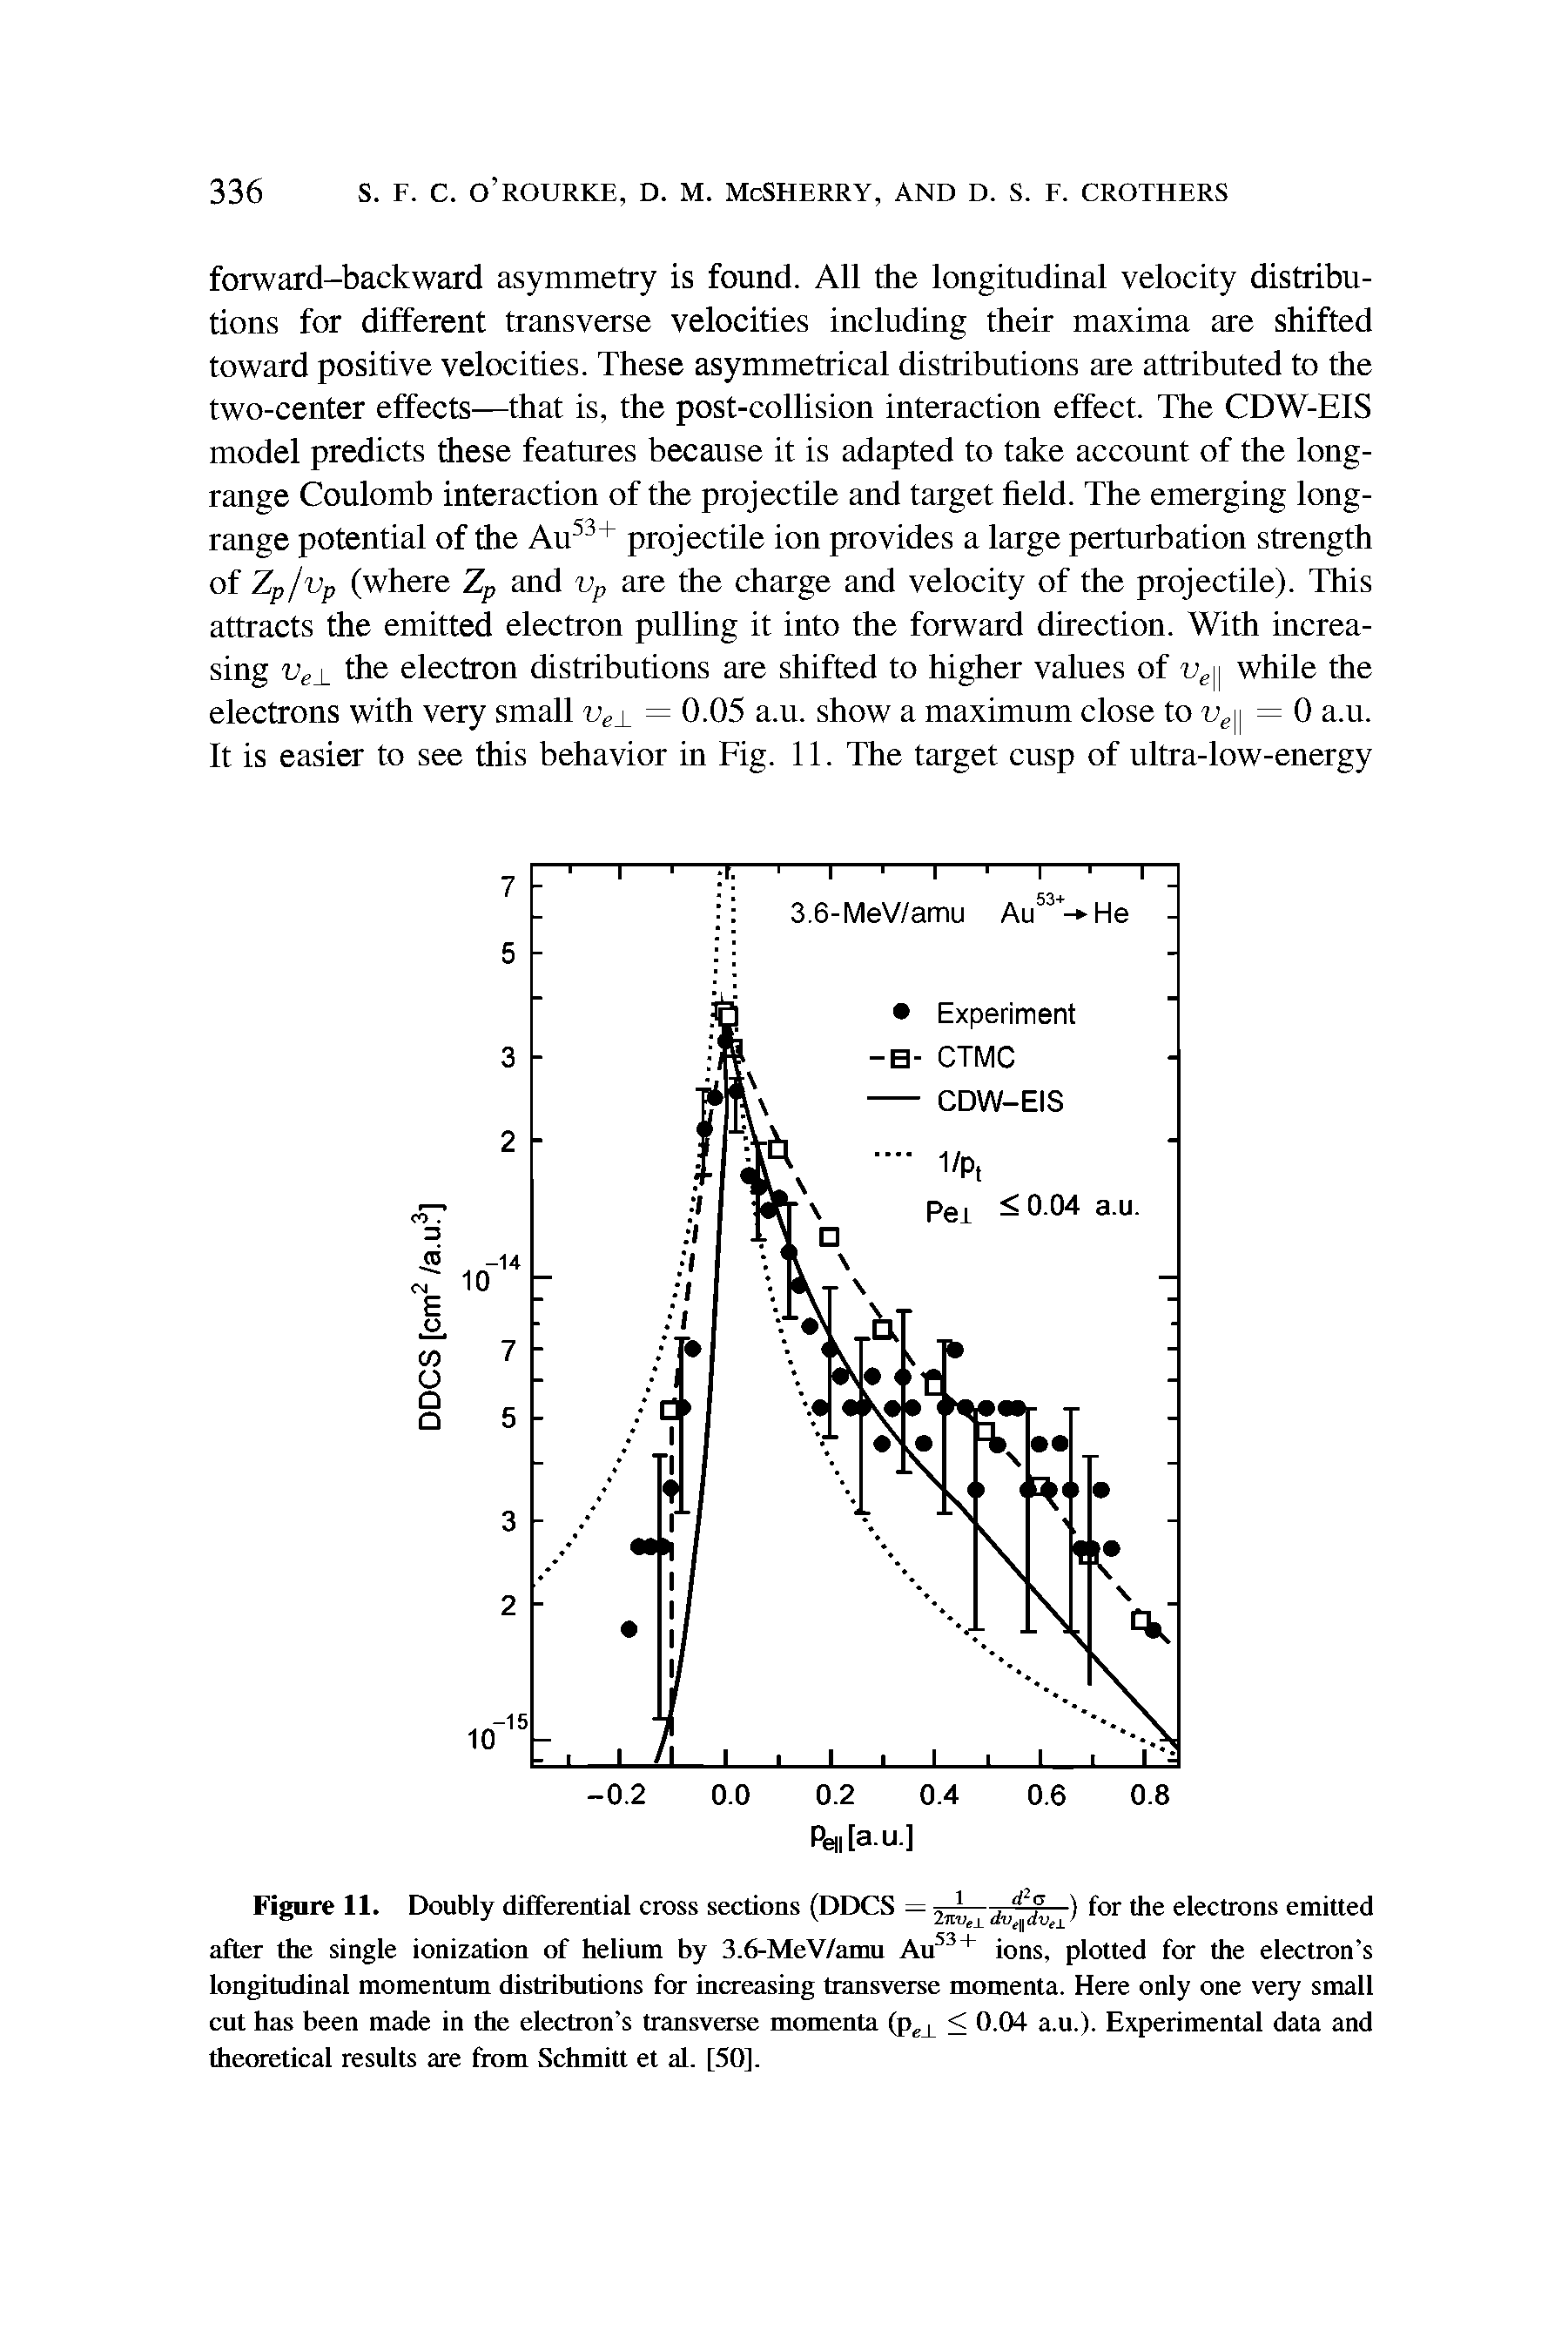 Figure 11. Doubly differential cross sections (DDCS — 2m> dufdv ) f°r the electrons emitted after the single ionization of helium by 3.6-MeV/amu Au53+ ions, plotted for the electron s longitudinal momentum distributions for increasing transverse momenta. Here only one very small cut has been made in the electron s transverse momenta (pf < 0.04 a.u.). Experimental data and theoretical results are from Schmitt et at. [50],...